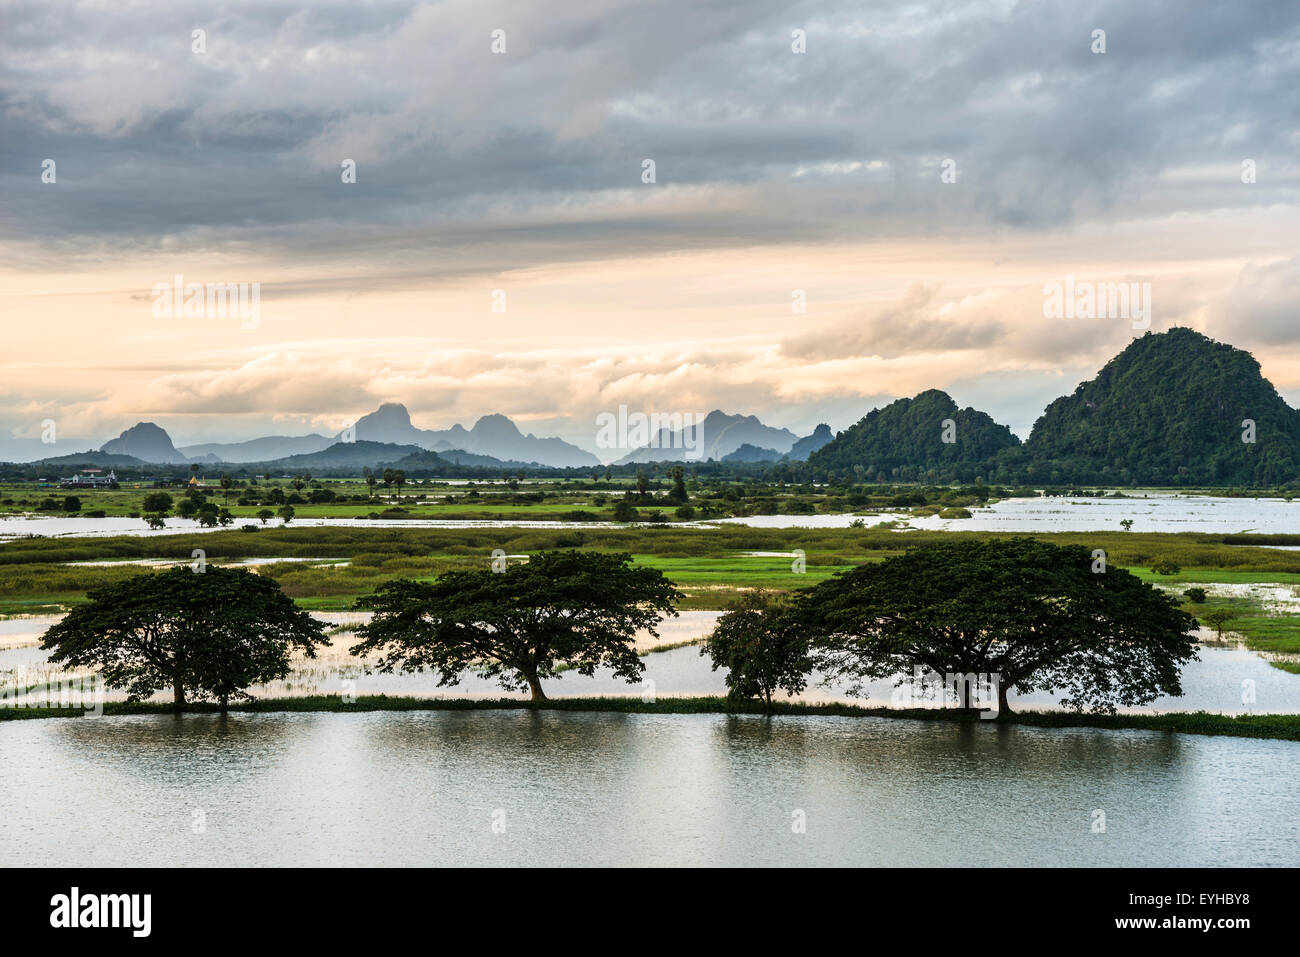 Sunset above tower karst mountains, artificial lake, landscape in the evening light, Hpa-an, Karen or Kayin State, Myanmar Stock Photo